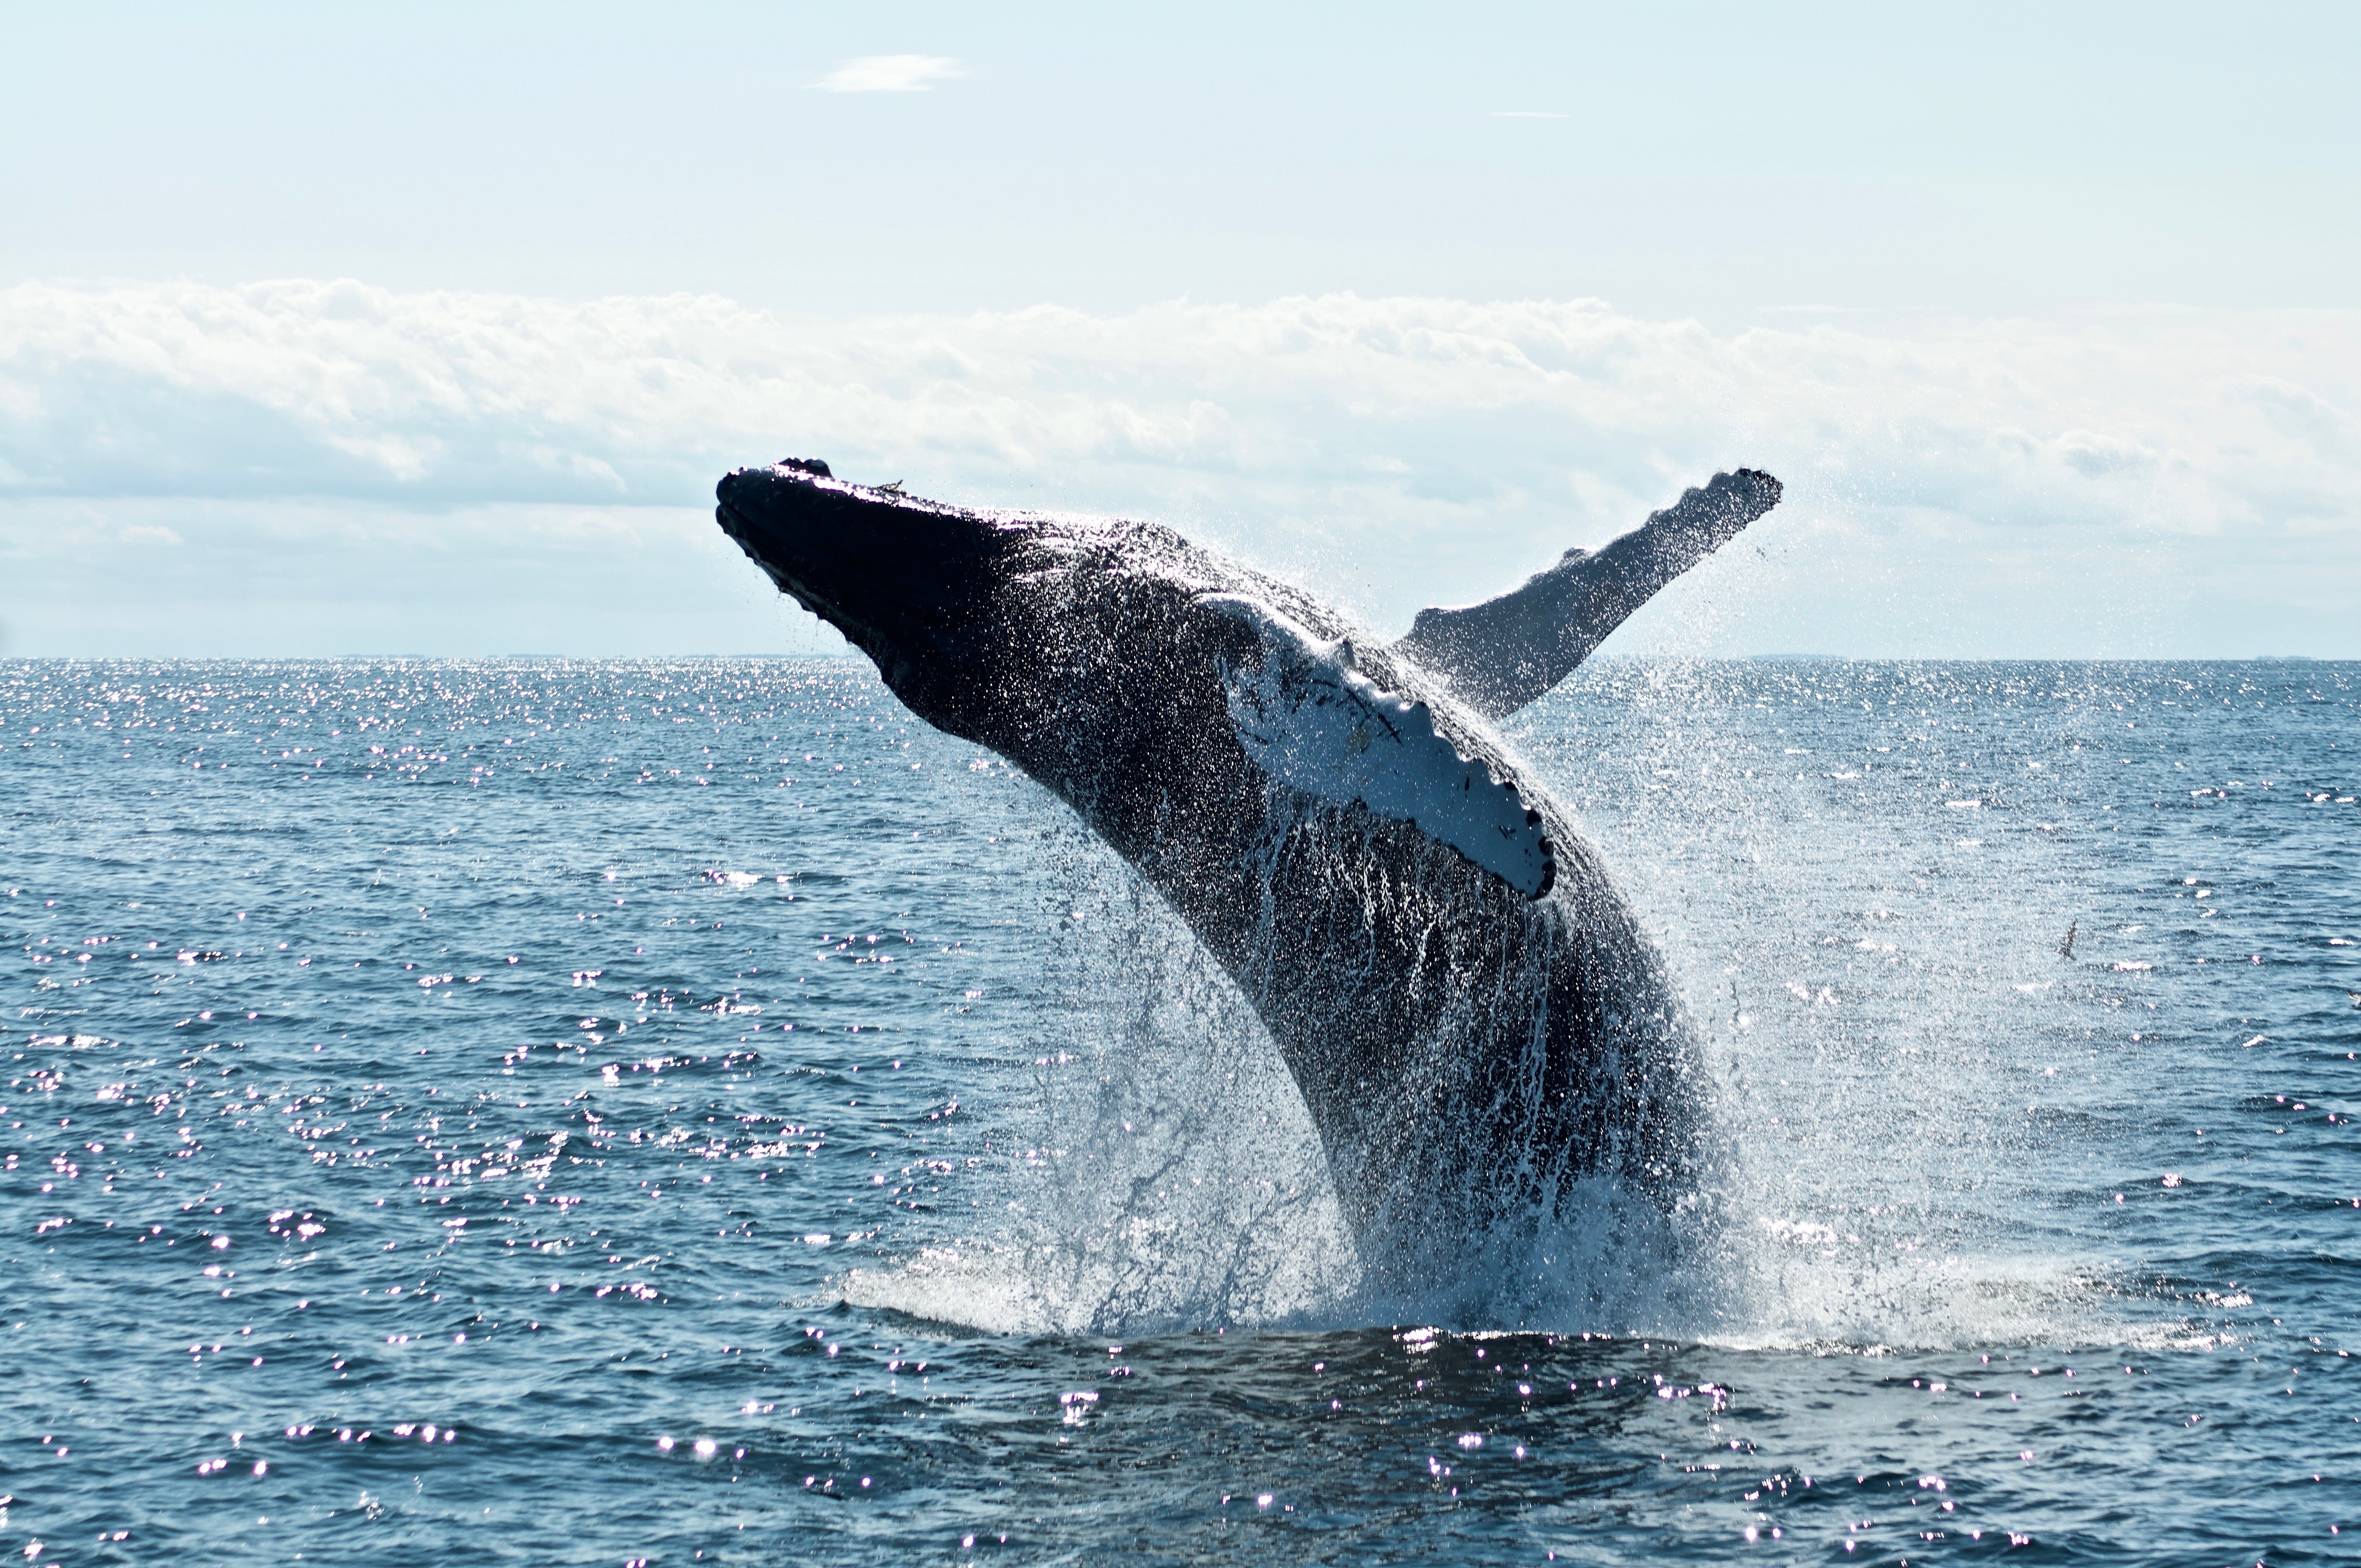 Whale watching experiences in the Caribbean